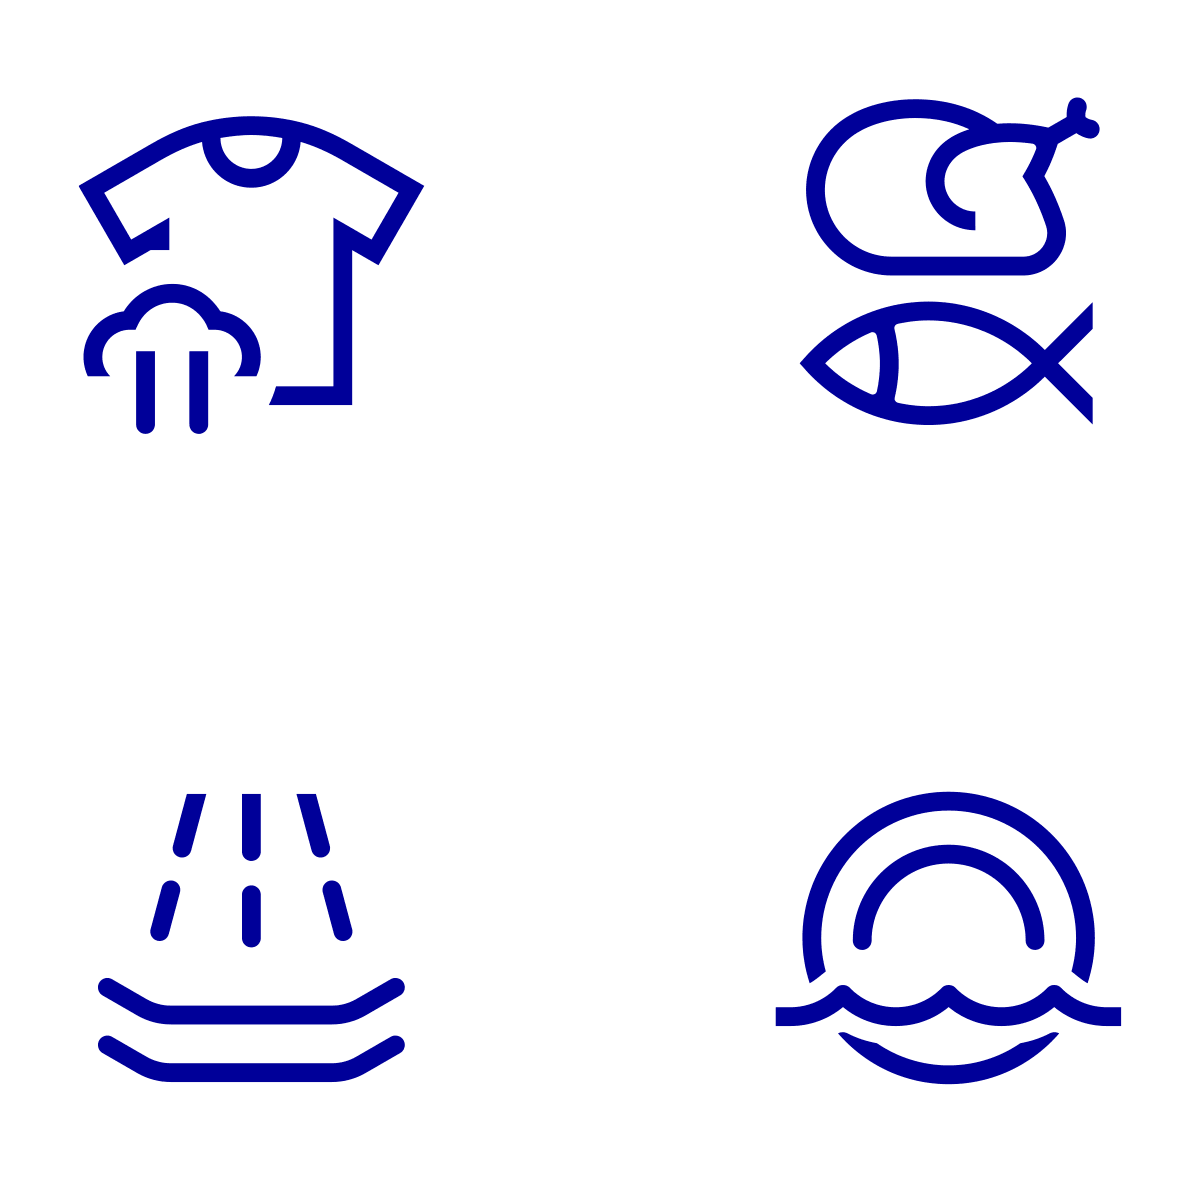 A selection of icons I designed for Electrolux which brought more warmth and humanity to the set of symbols.